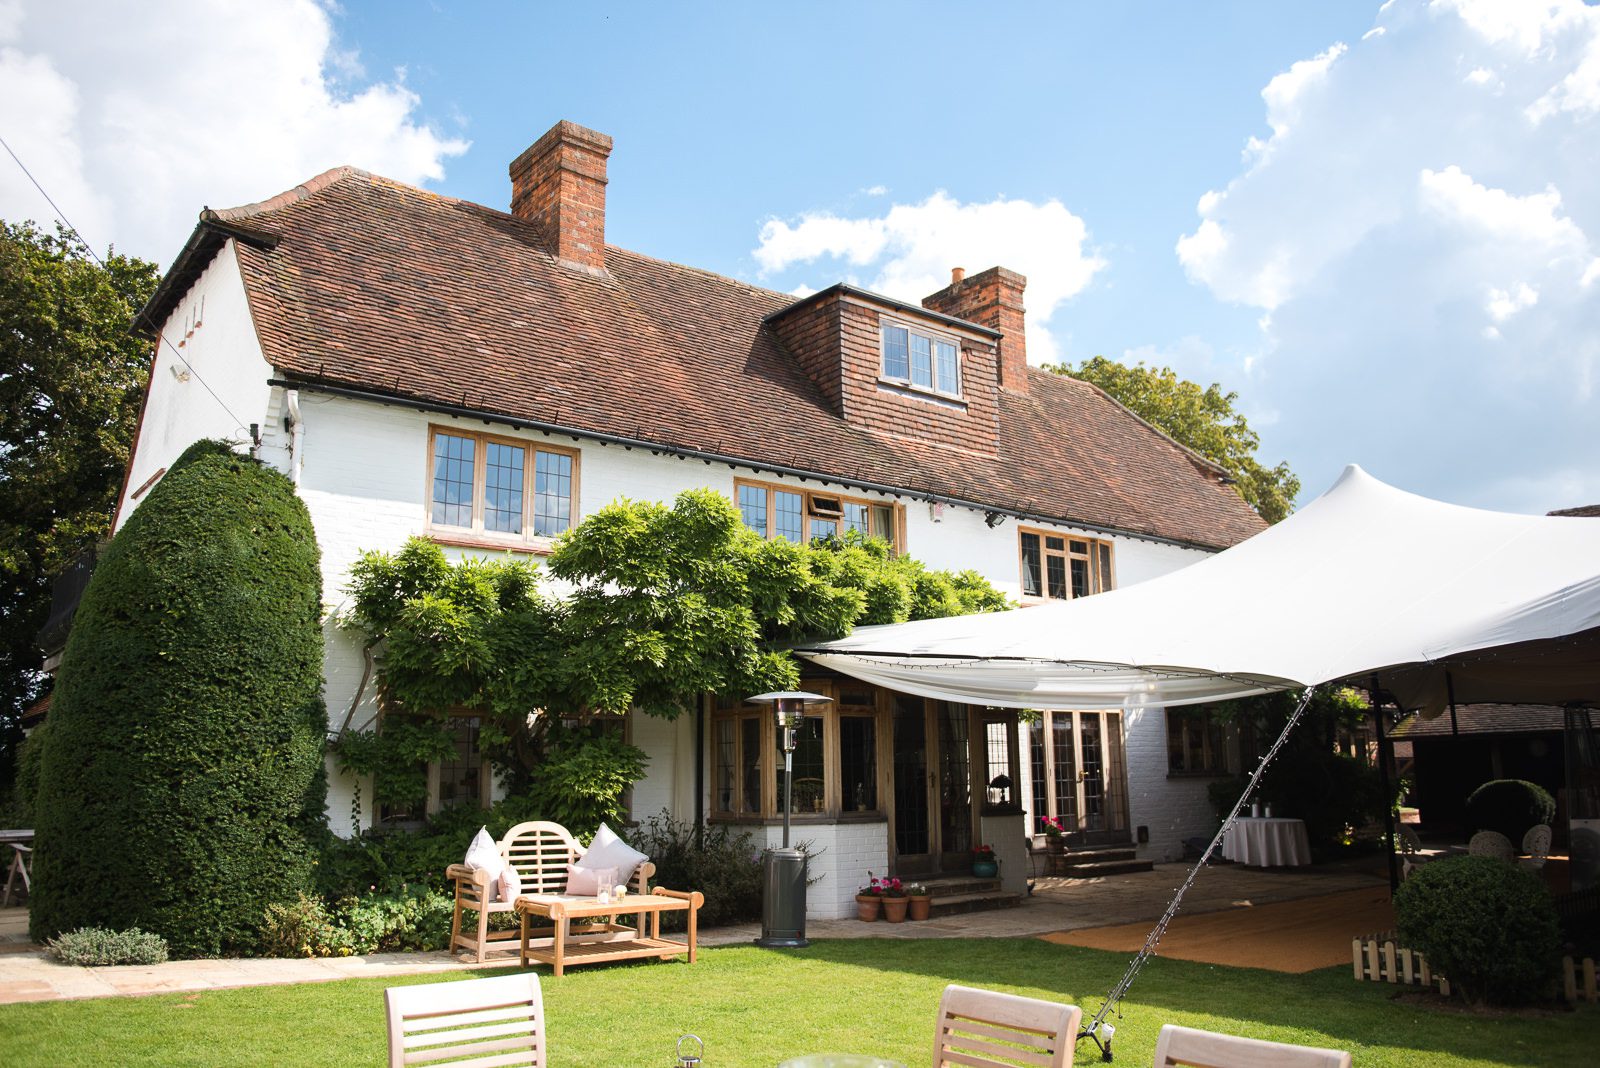 Luxury Berkshire home wedding day with comfy cushions and sun and rain canopy.